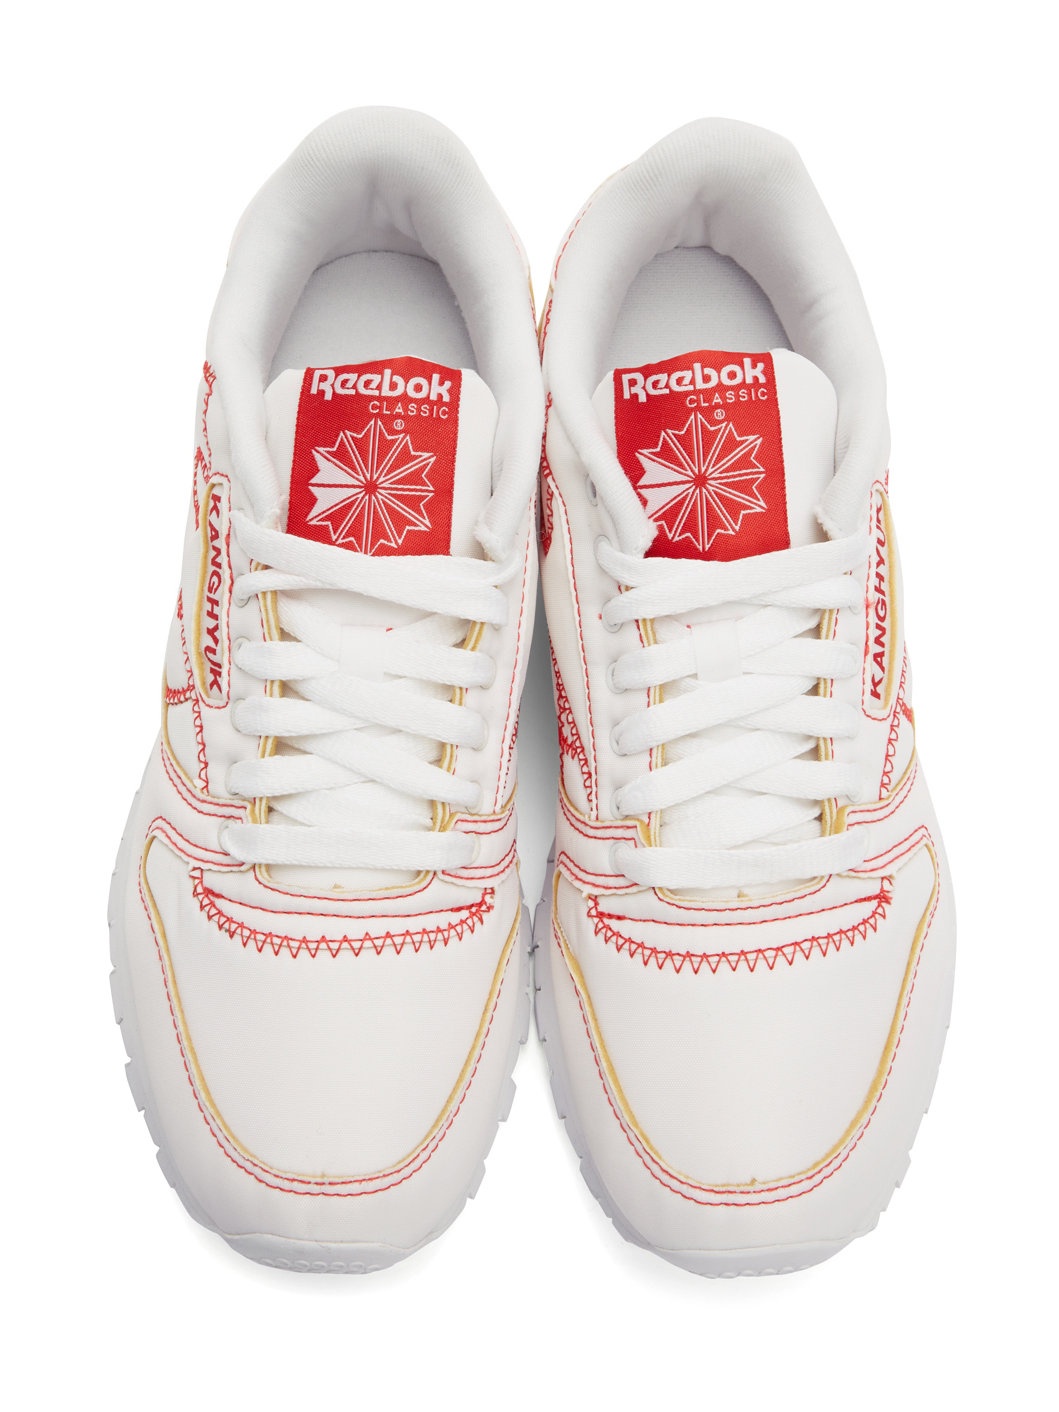 White Reebok Classic Edition Sneakers - 5